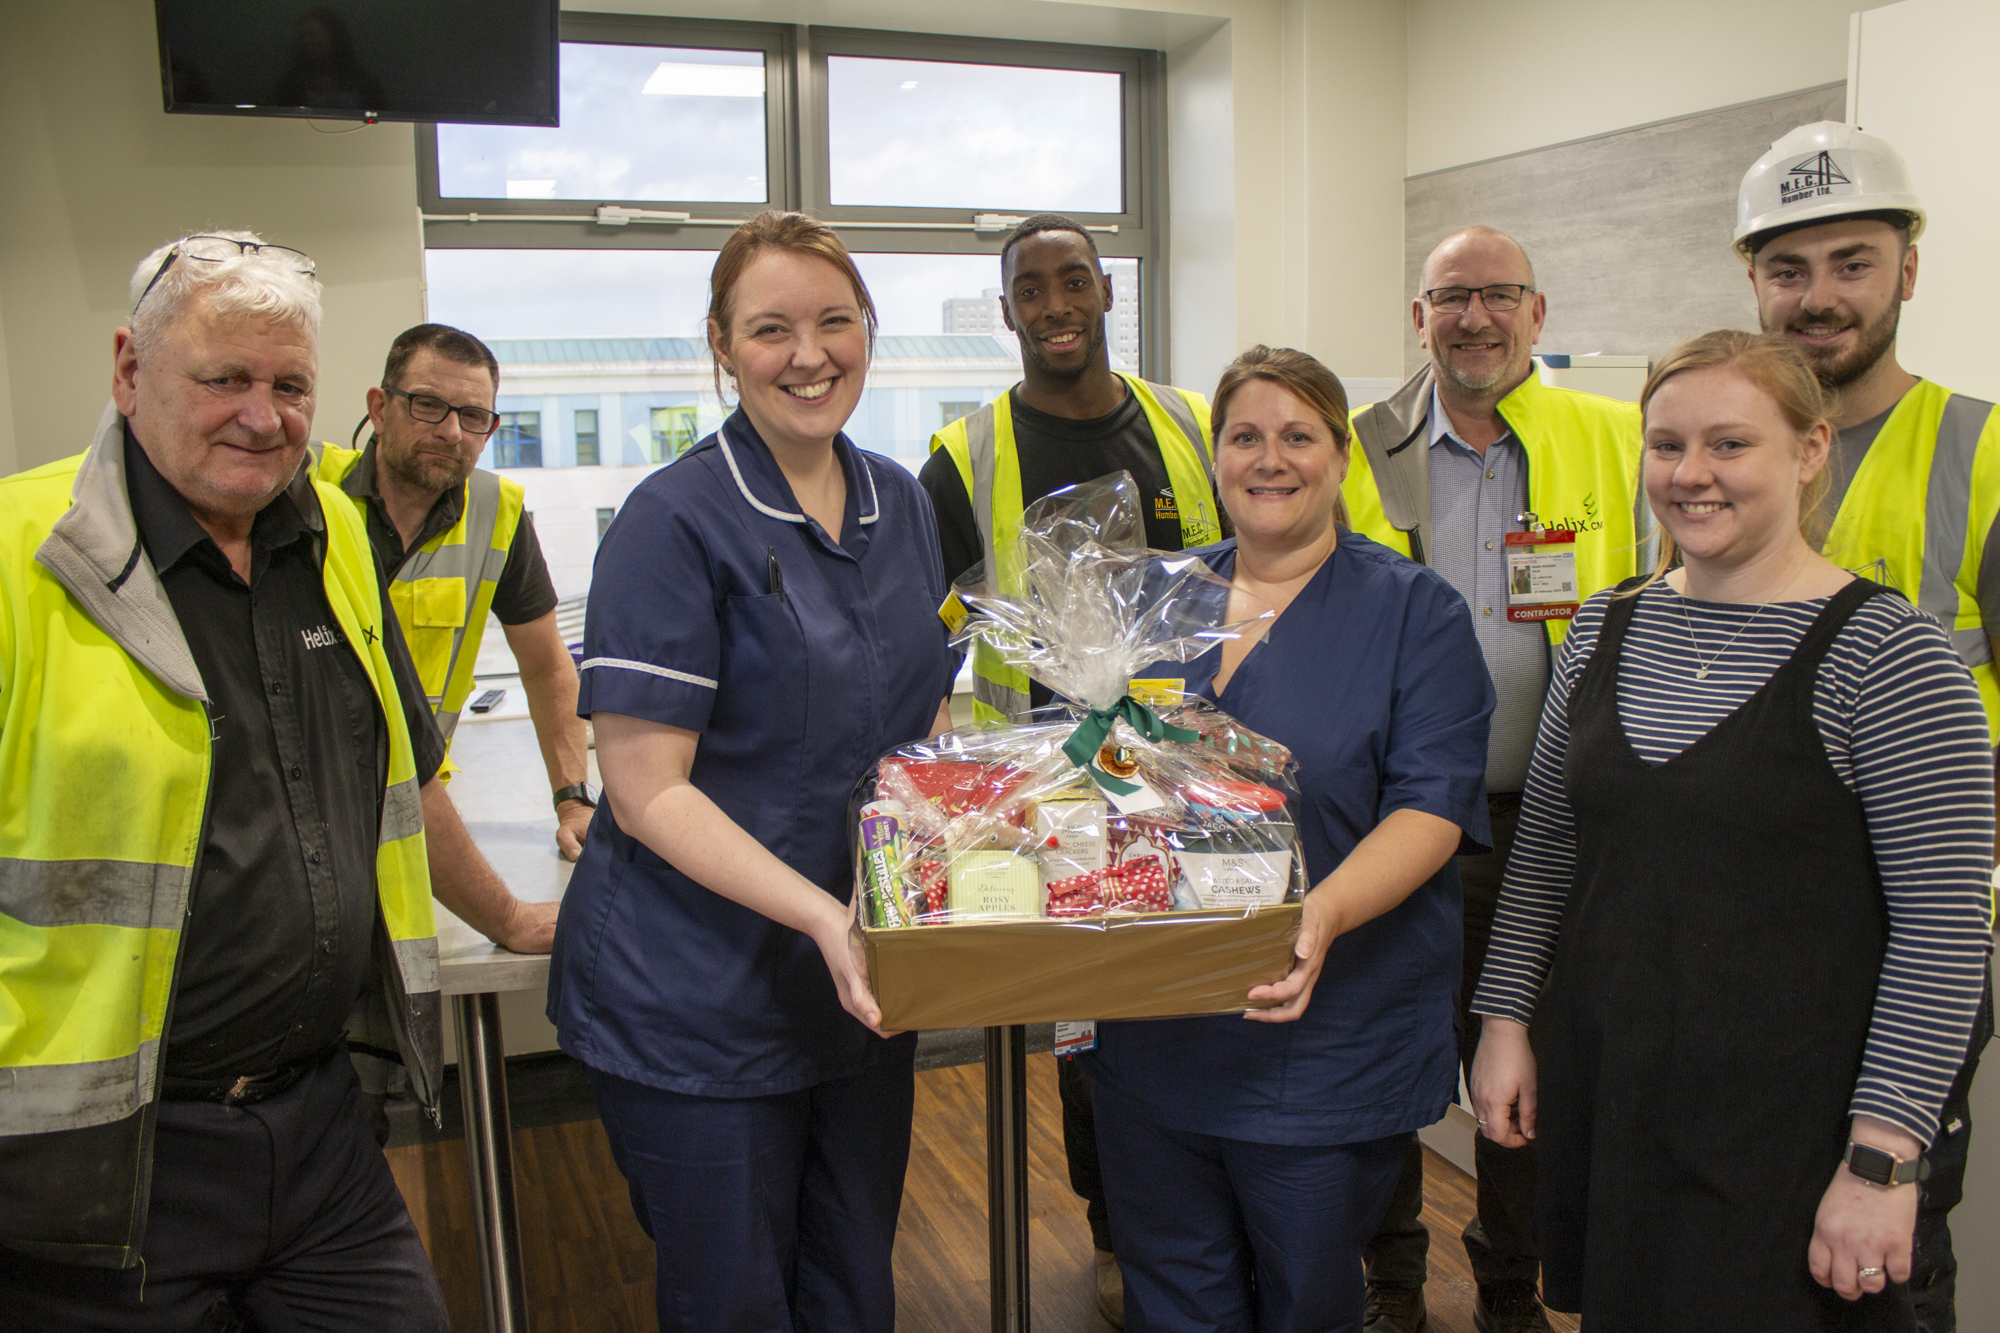 Construction staff and NICU staff receiving a gift hamper in the newly refurbished parents room